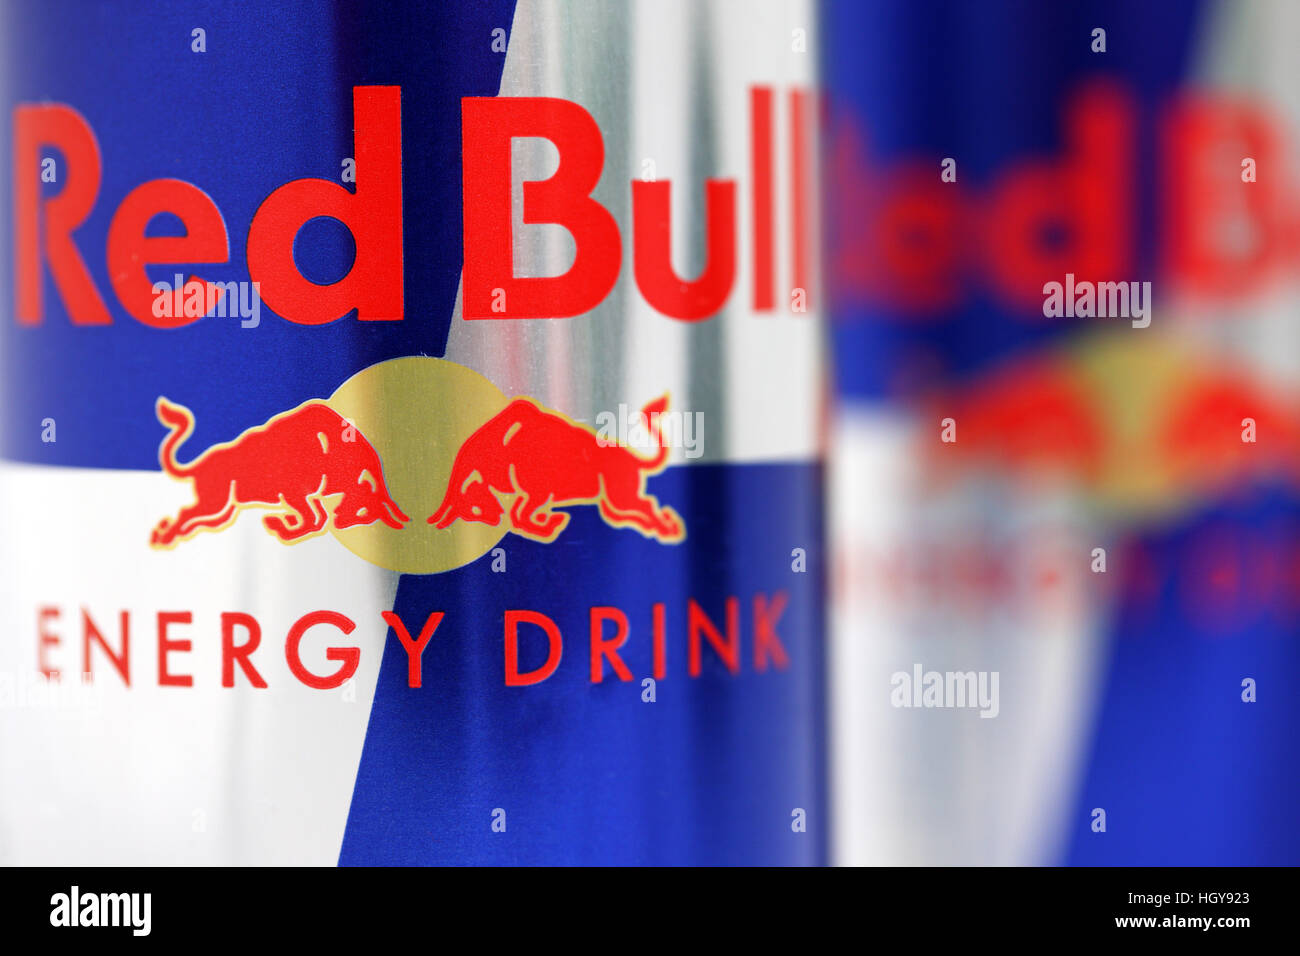 Red Bull energy drink cans Stock Photo